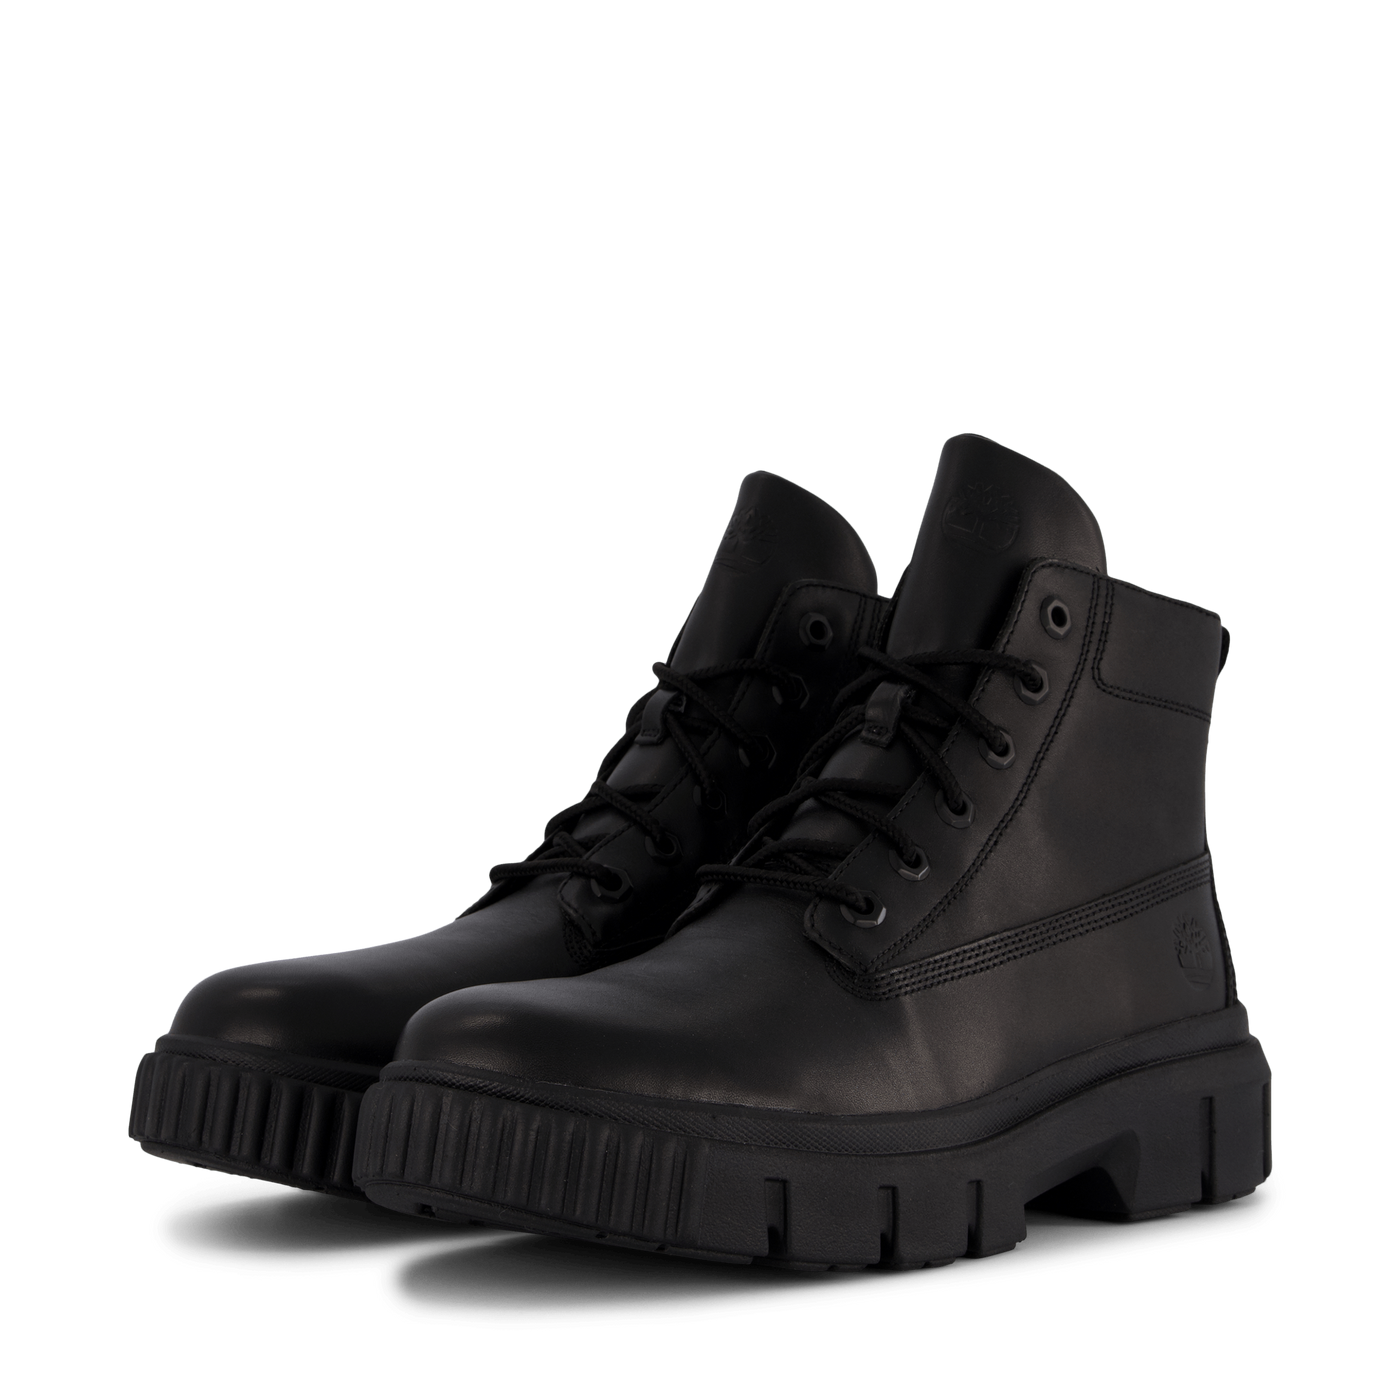 Greyfield Leather Boot Black